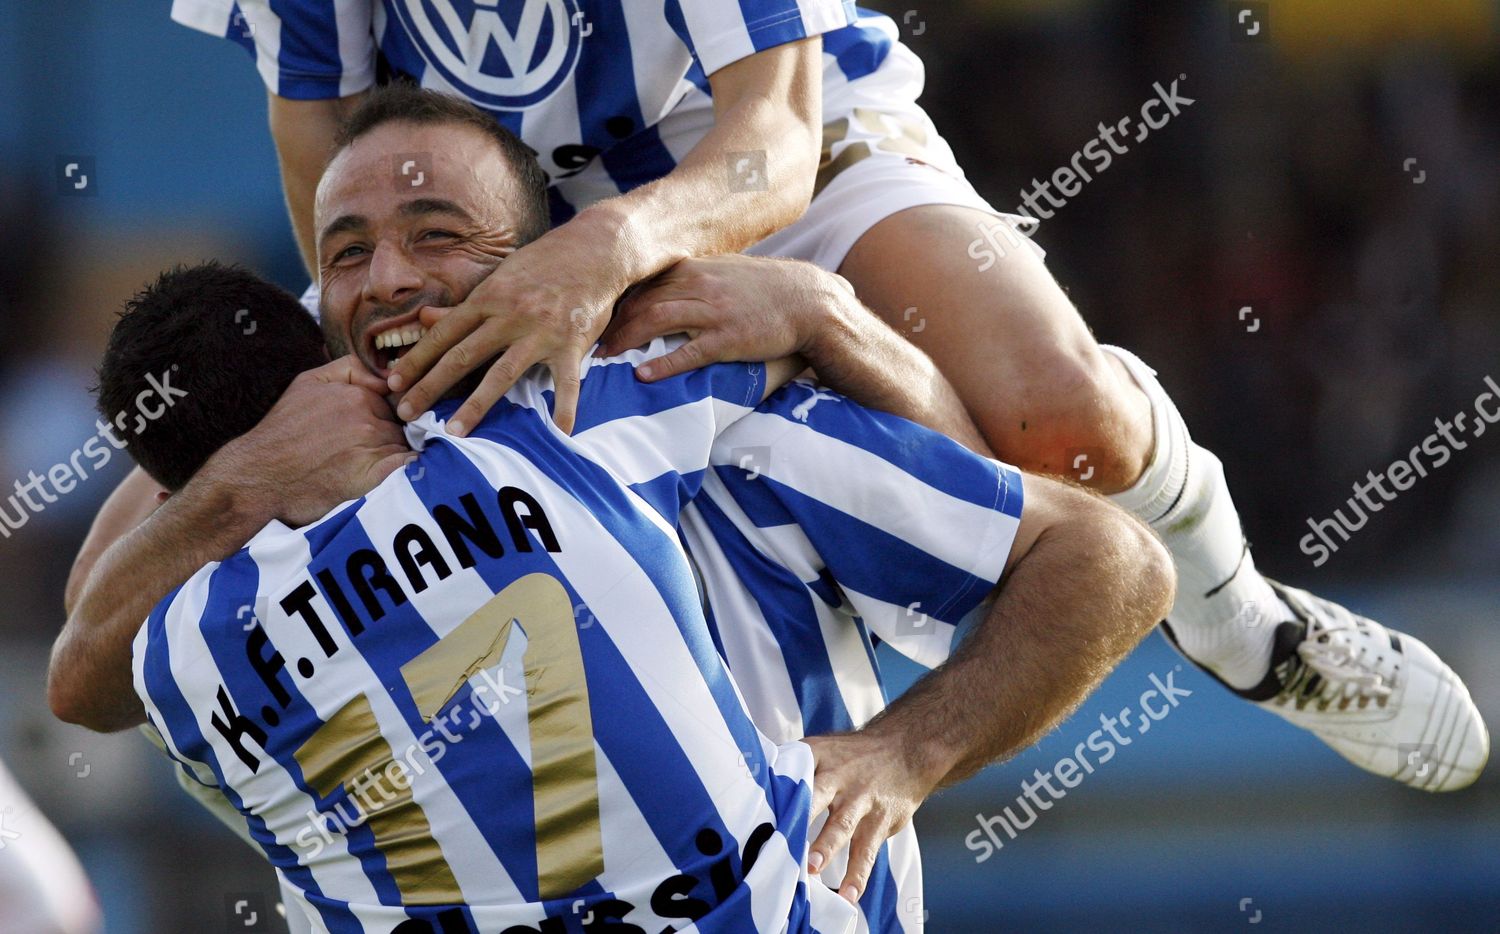 Mandatory Credit: Photo by Armando Babani/EPA/Shutterstock (7825980a) Migen Memelli of Fk Tirana is Congratulated by His Team Mates After Scoring For the Second and Equalizing Goal Against Kf Partizani During Their 138 Derby Match of the Albanian Premier League in Tirana Albania 18 April 2009 Match Ended with a 2-2 Albania Soccer Tirana Vs Partizani - Apr 2009